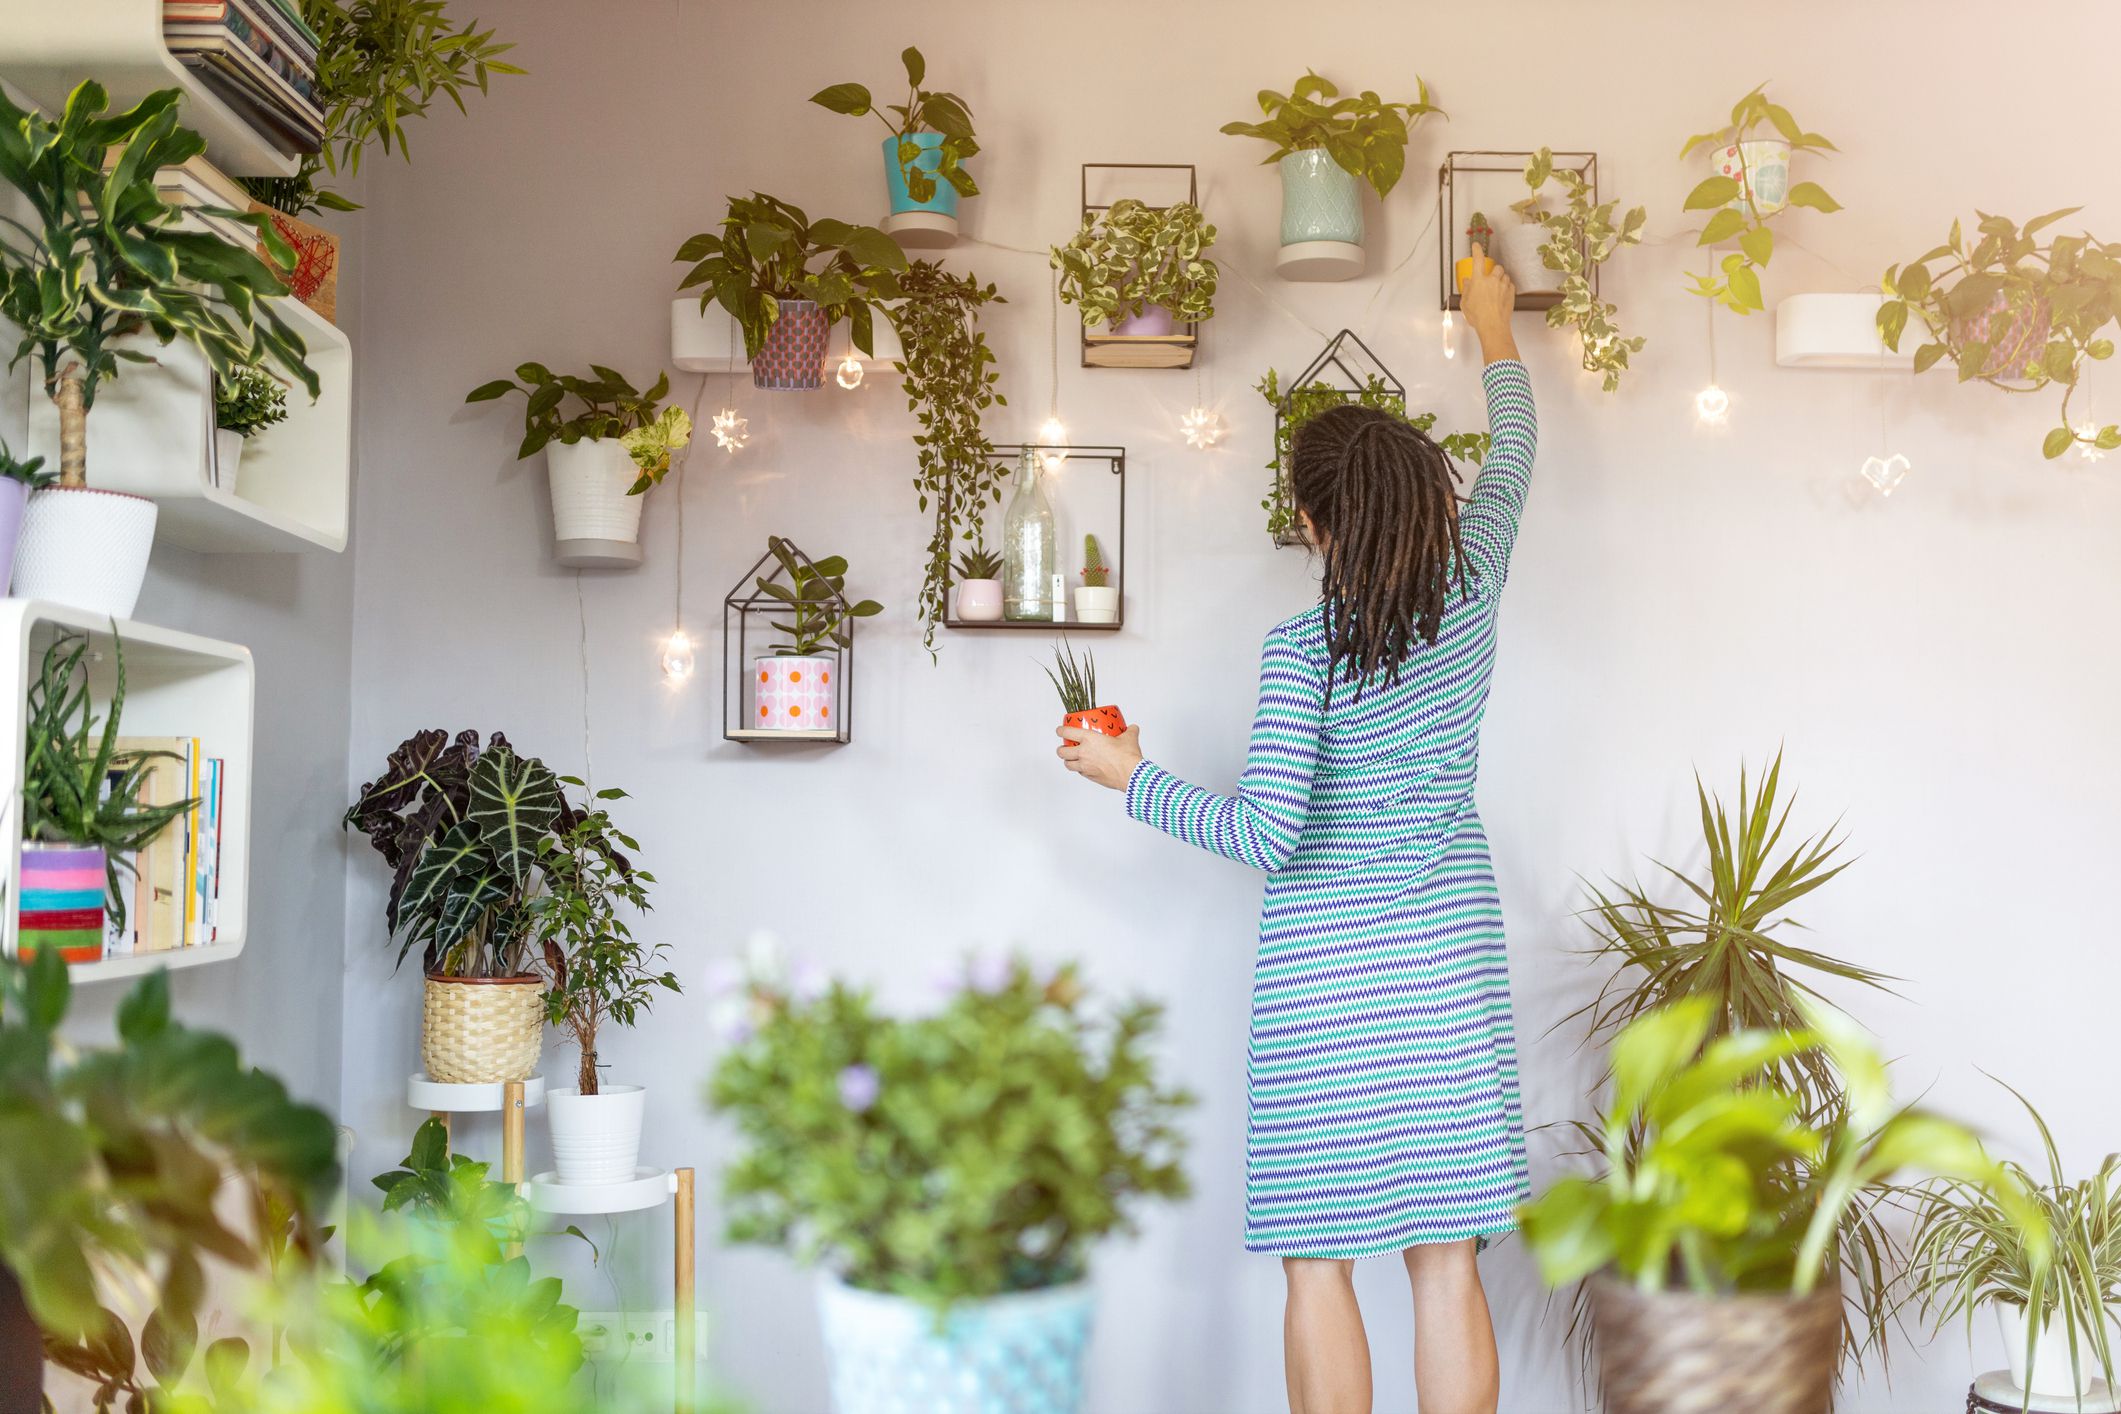 8 Indoor plants to add greenery to your indoors